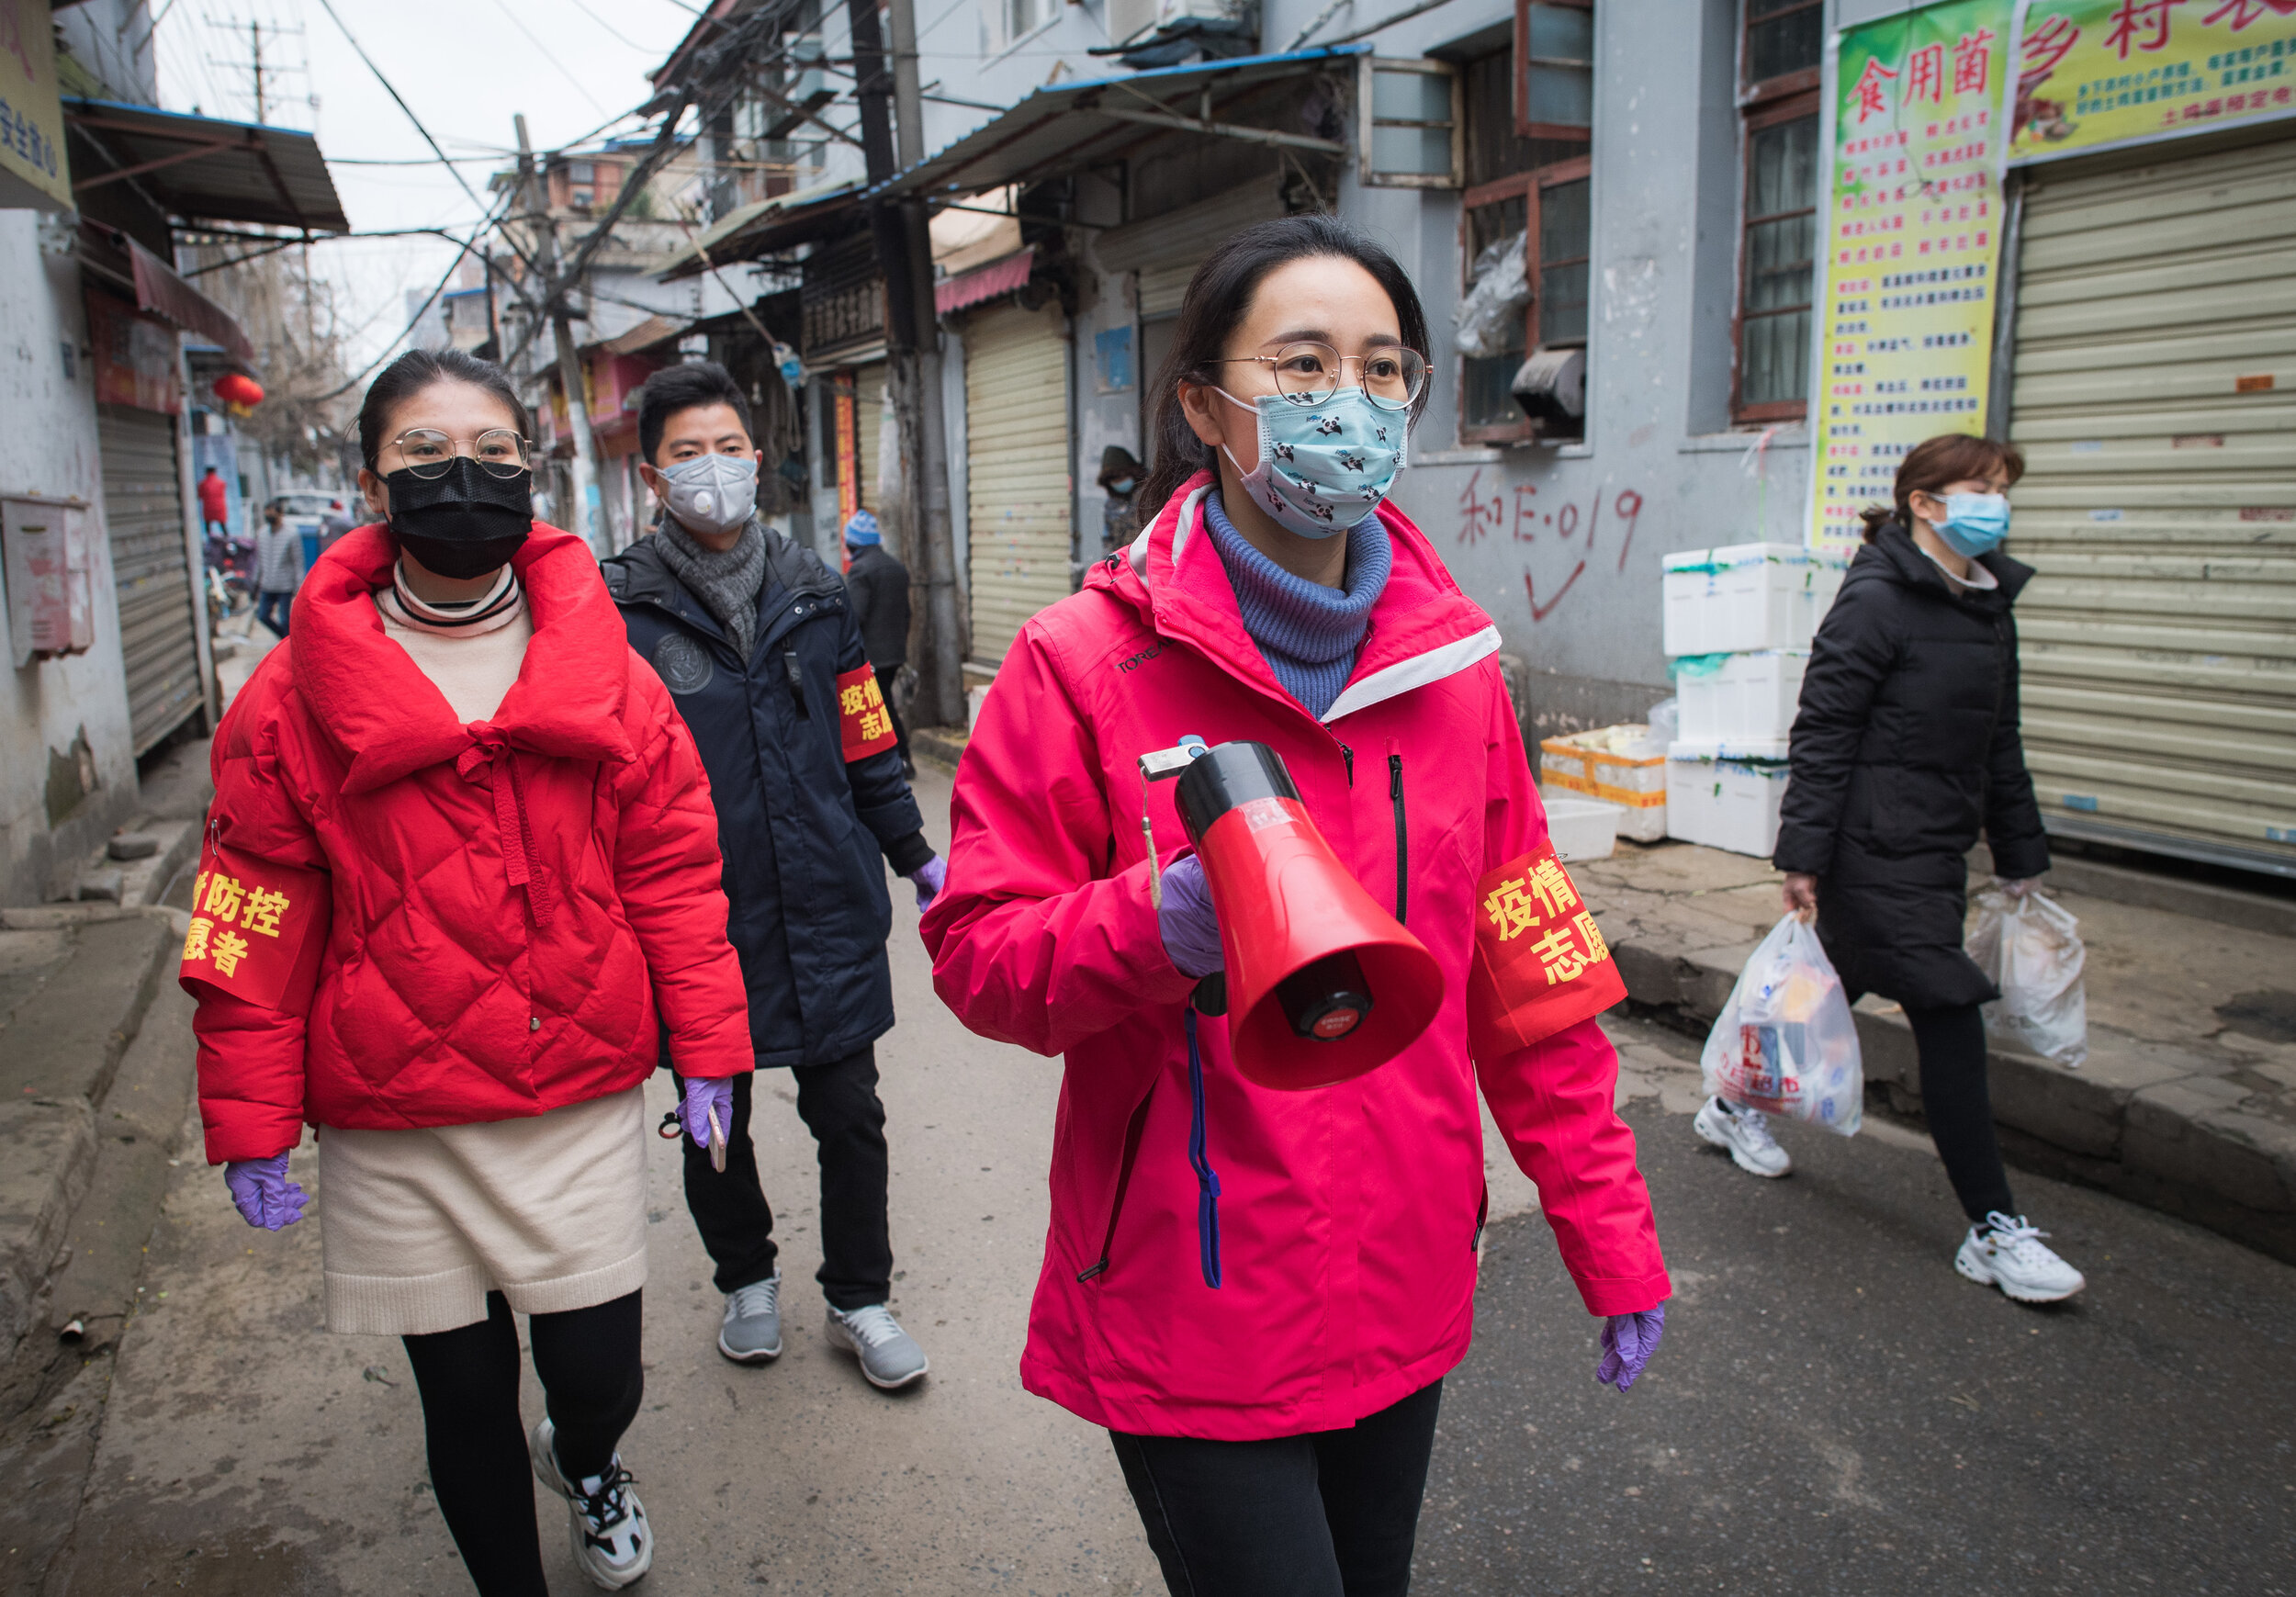 Neighborhood community workers conduct door-to-door visits to ensure community prevention and control of COVID-19 at a street near the Yellow Crane Pavilion in Wuhan, Hubei. Feb. 7, 2020. (Source: Xinhua/Xiao Yijiu)